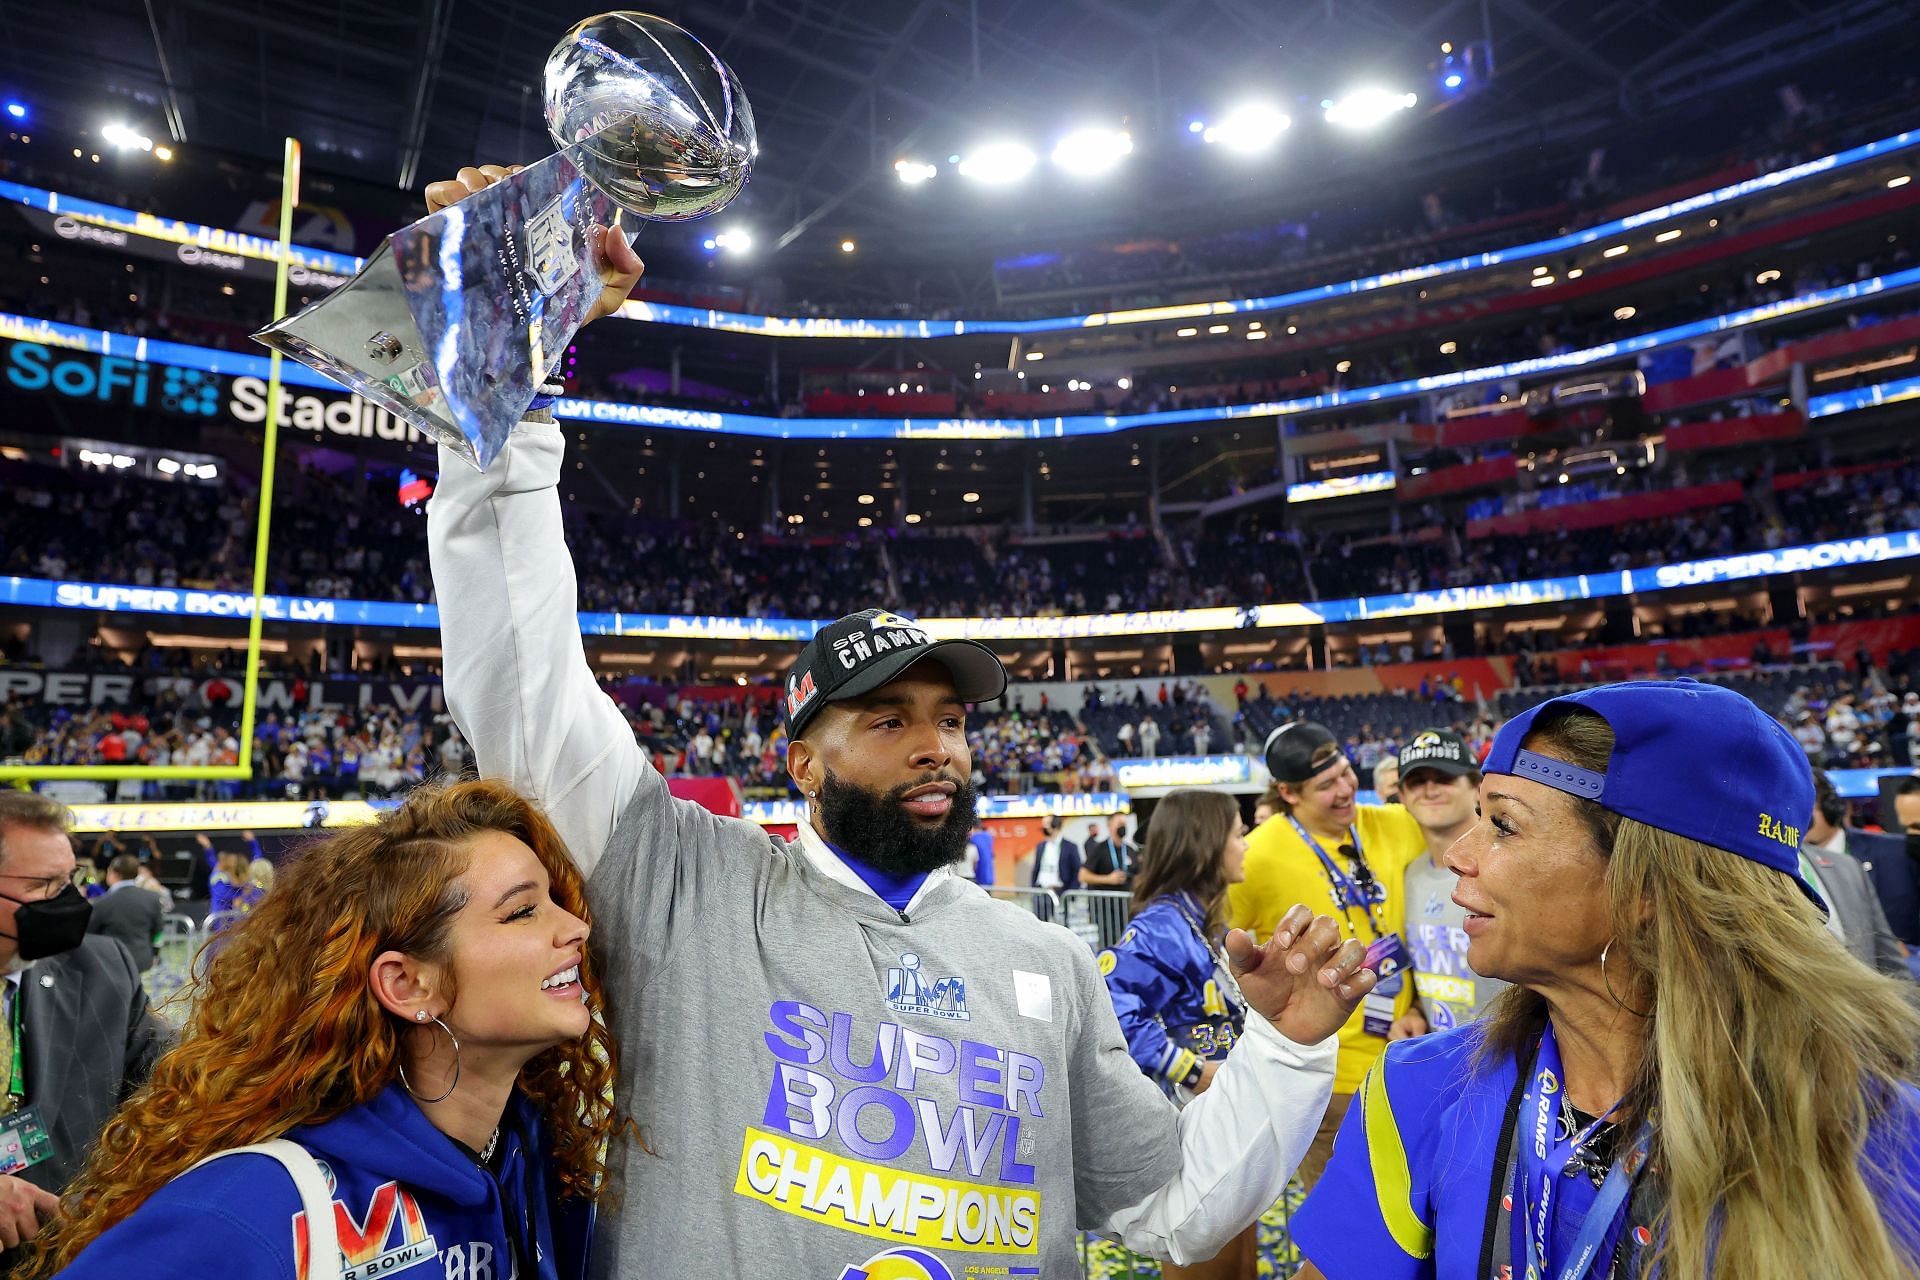 Odell Beckham Jr. recently won his first Super Bowl with the Los Angeles Rams